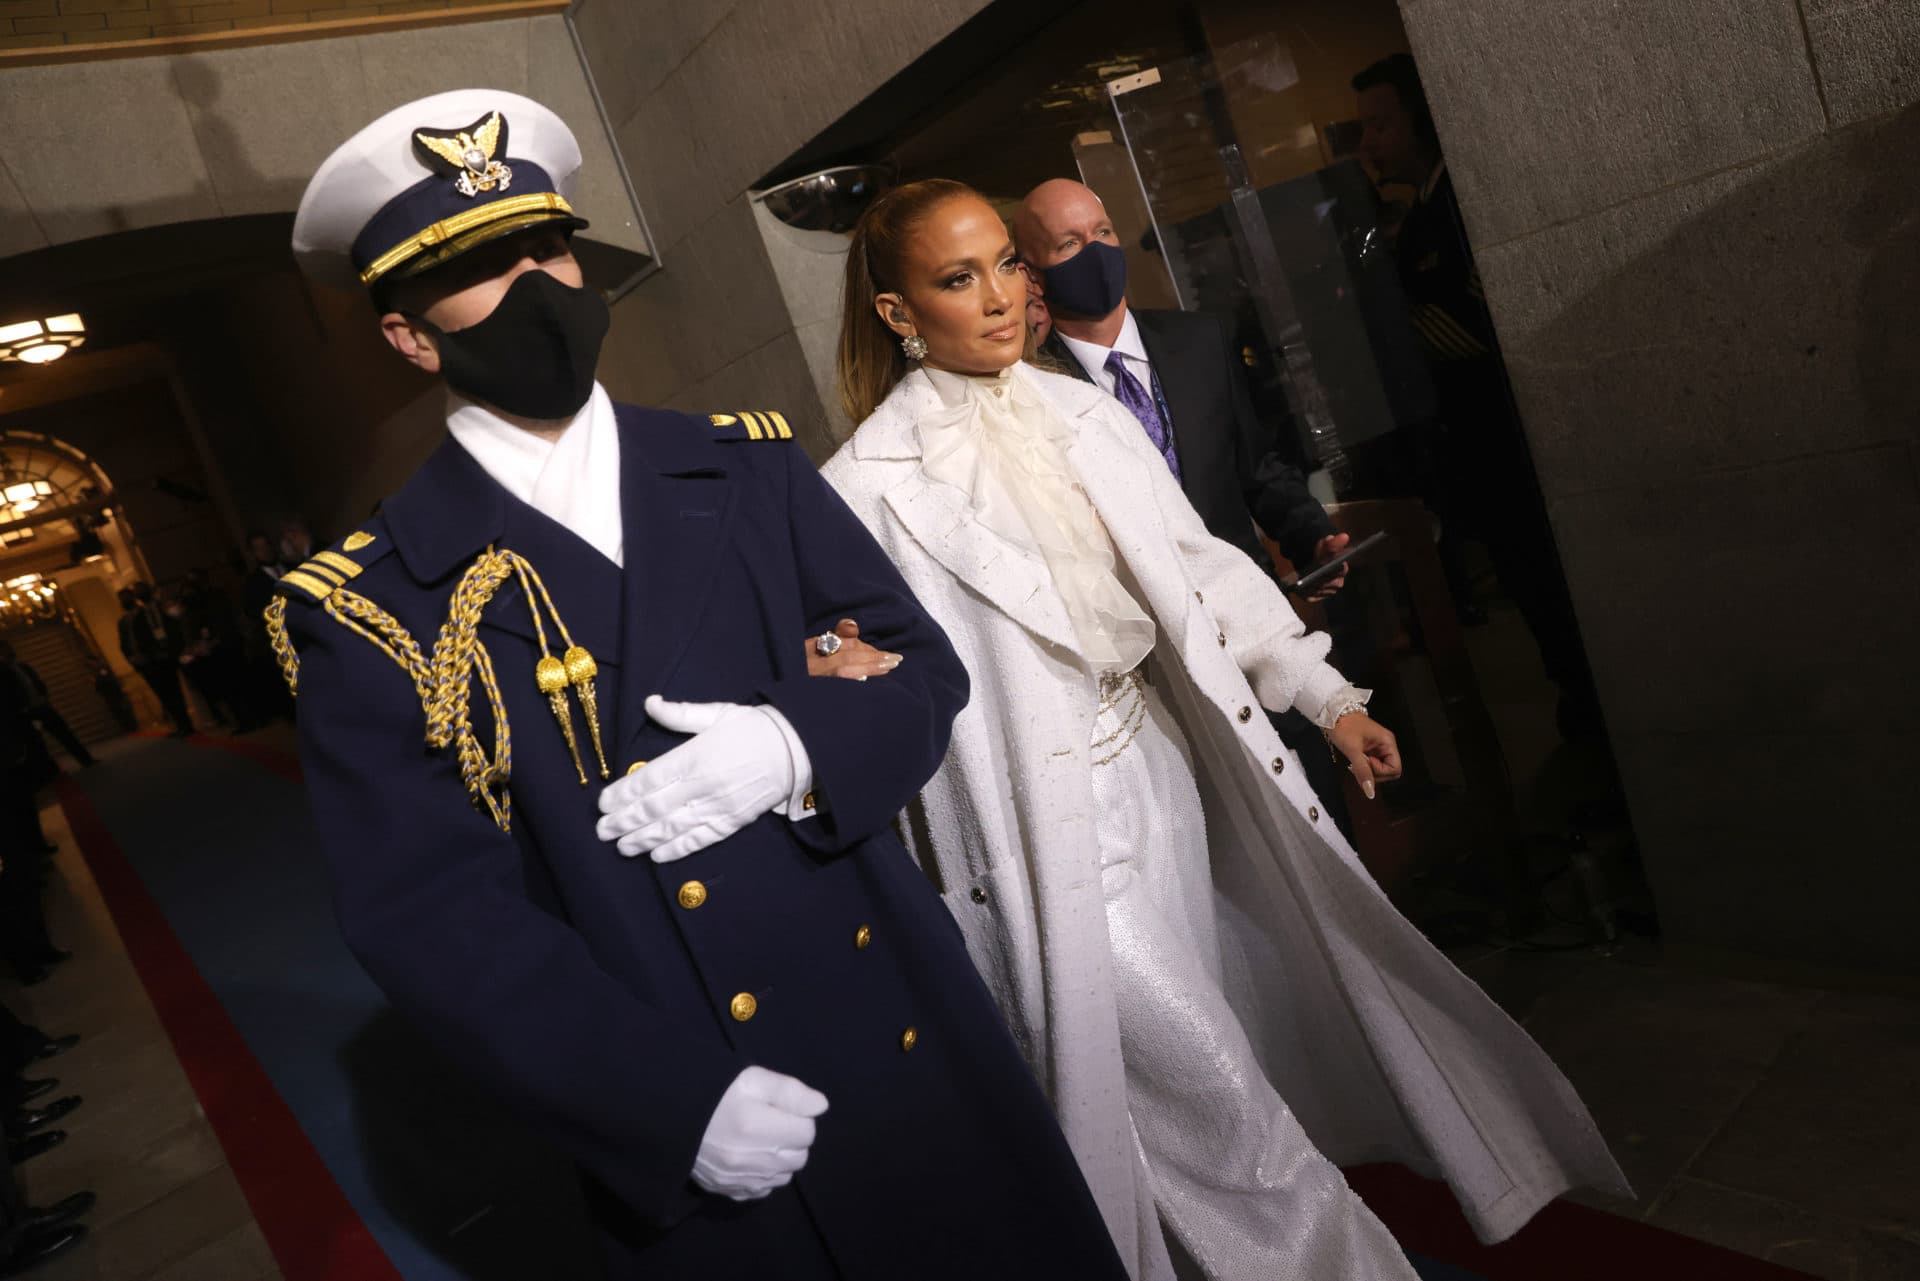 Jennifer Lopez is escorted to the inauguration to perform ahead of Biden's swearing in. (Win McNamee/Getty Images)